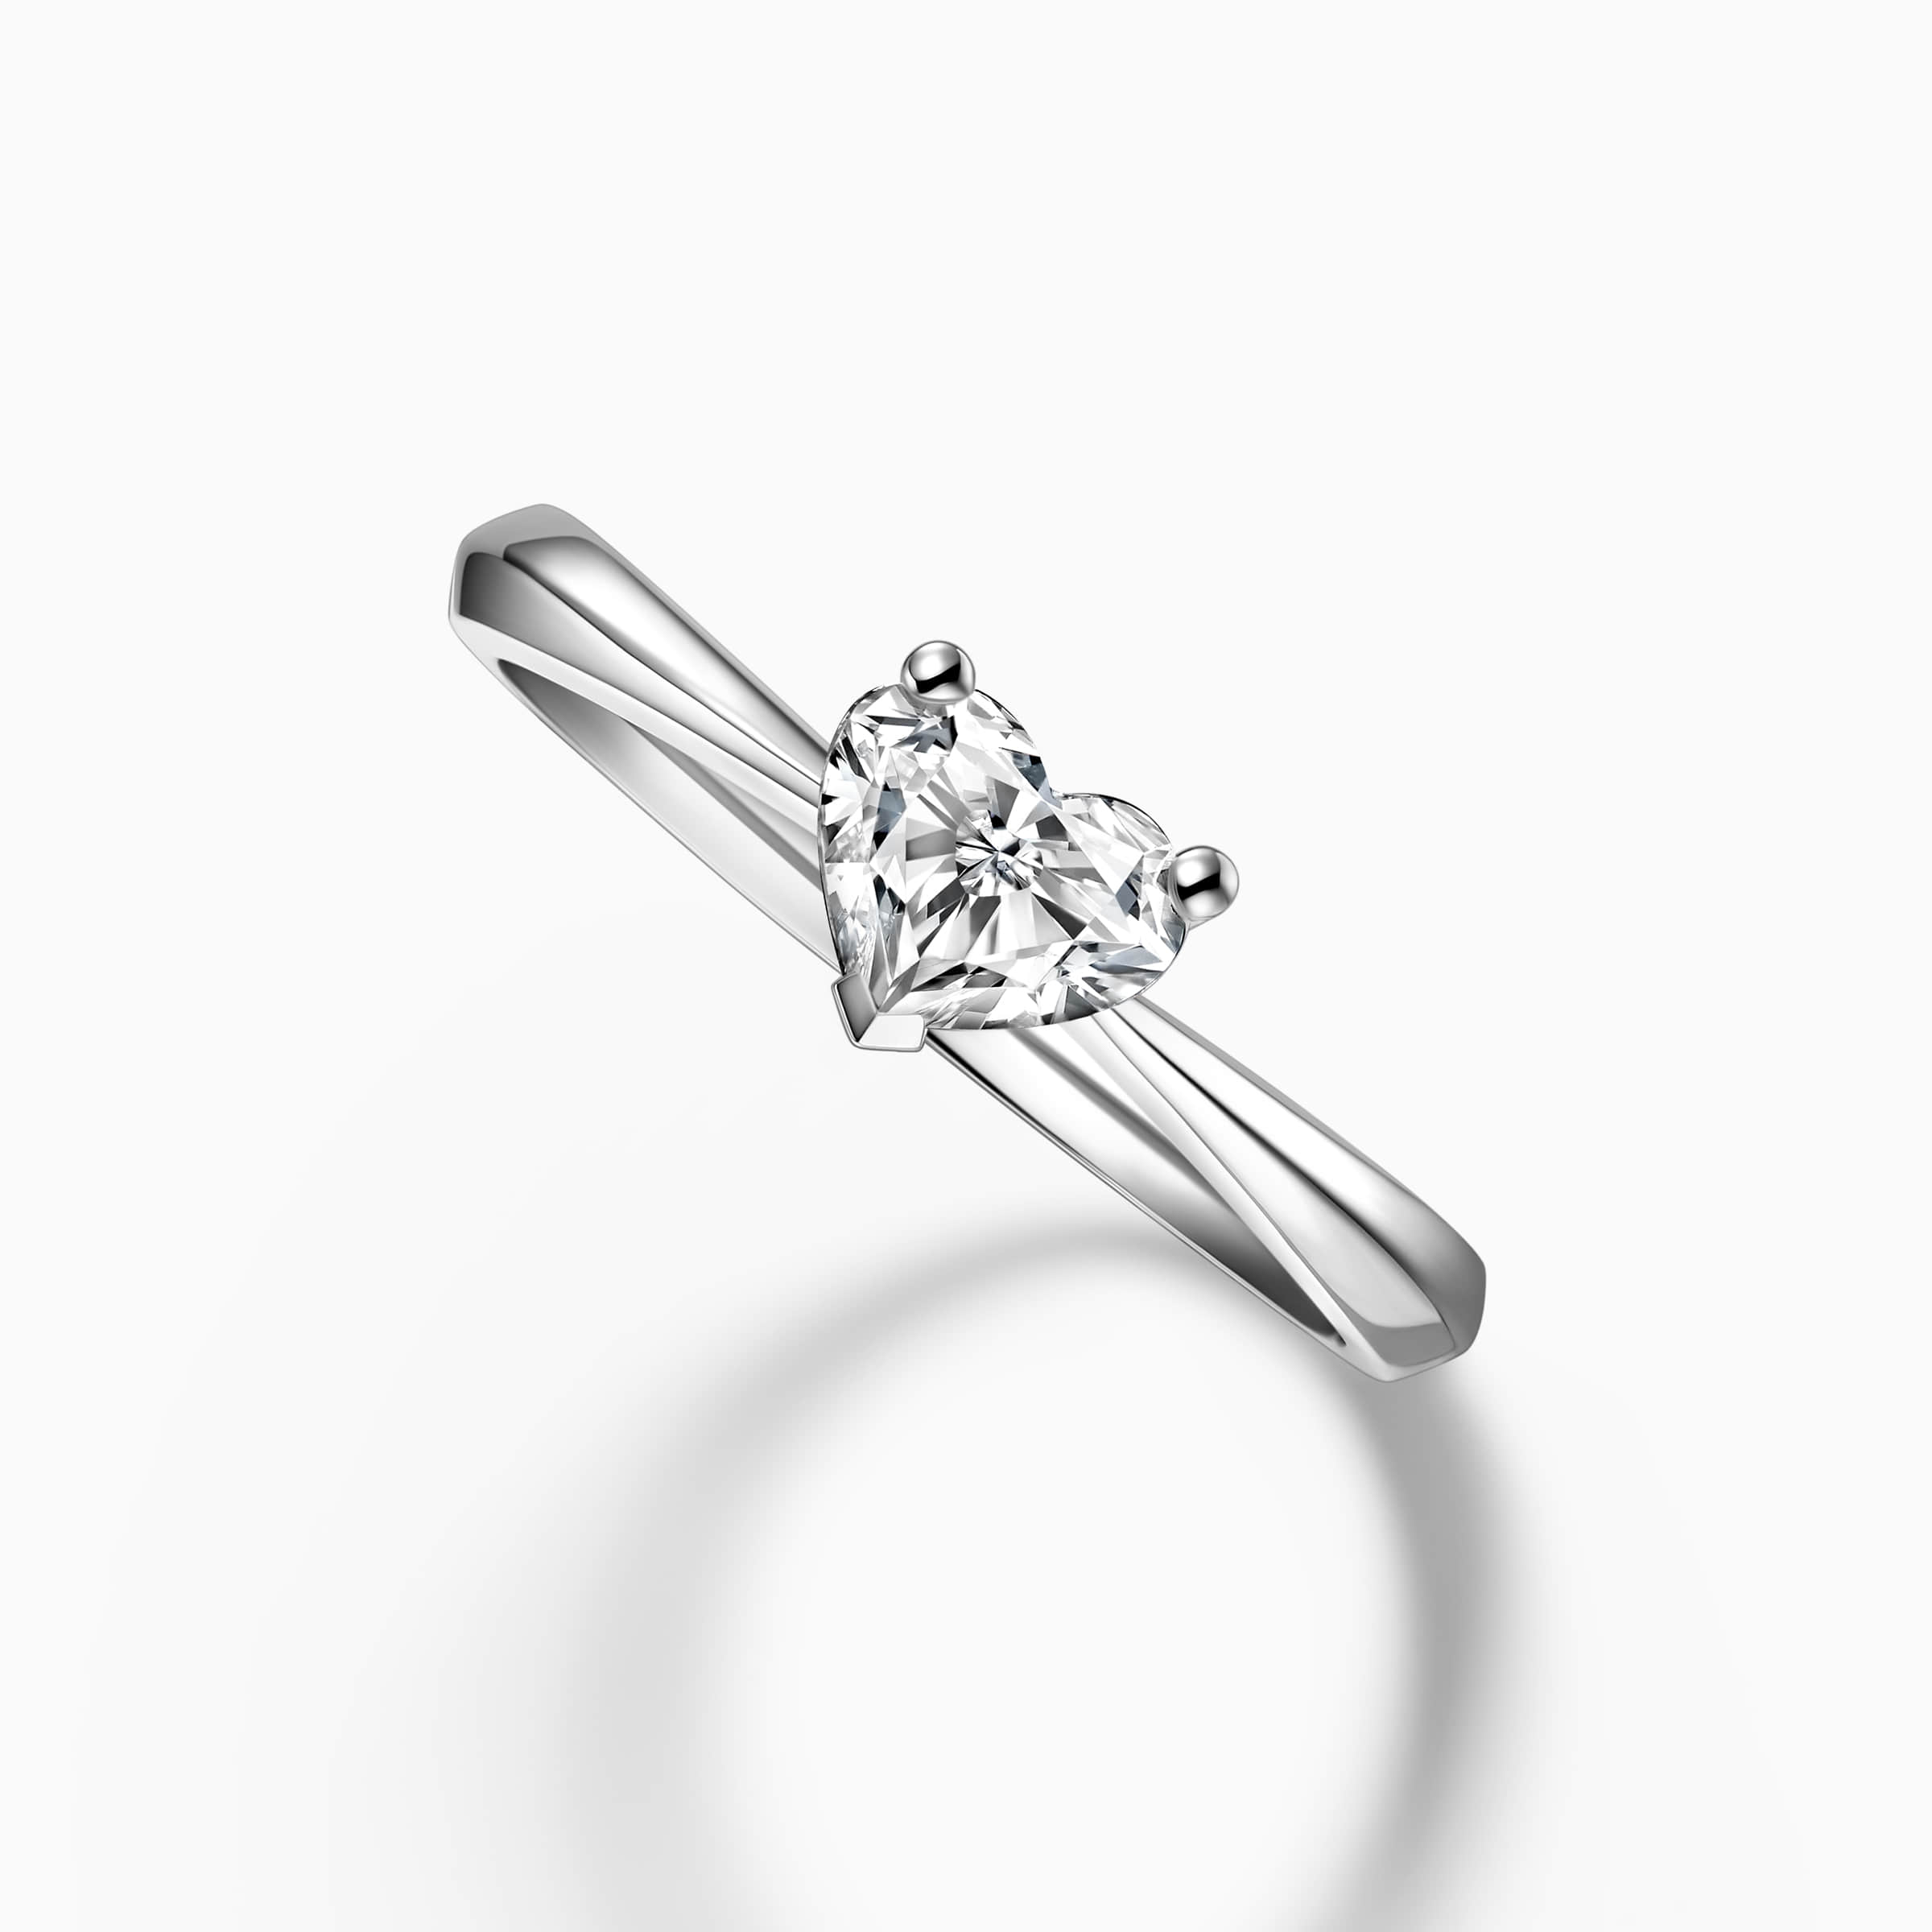 darry ring heart shaped solitaire diamond engagement ring angle view